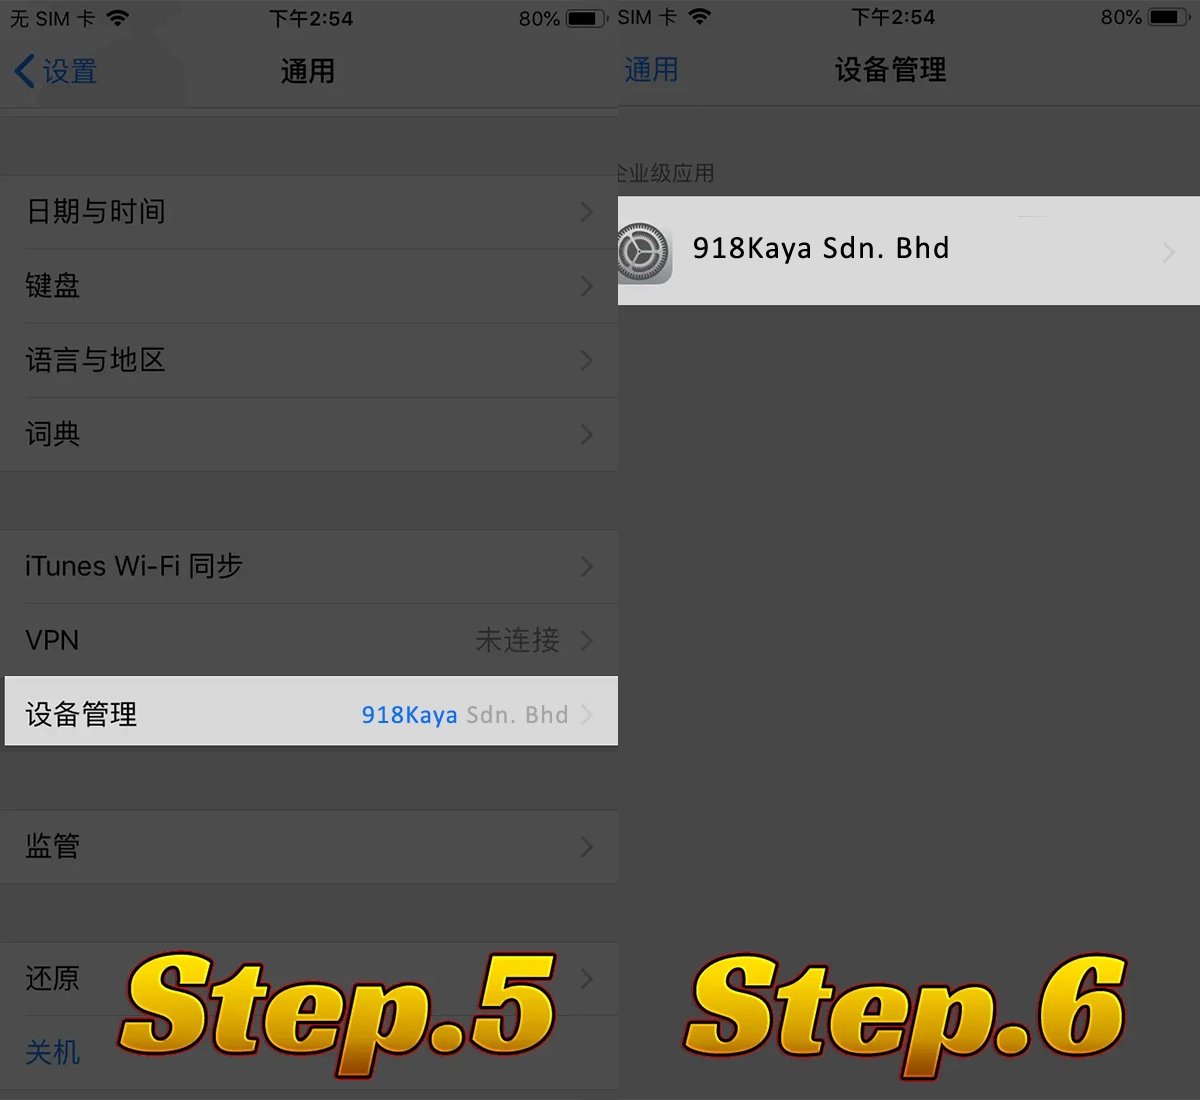 iOS installation step 5 and step 6